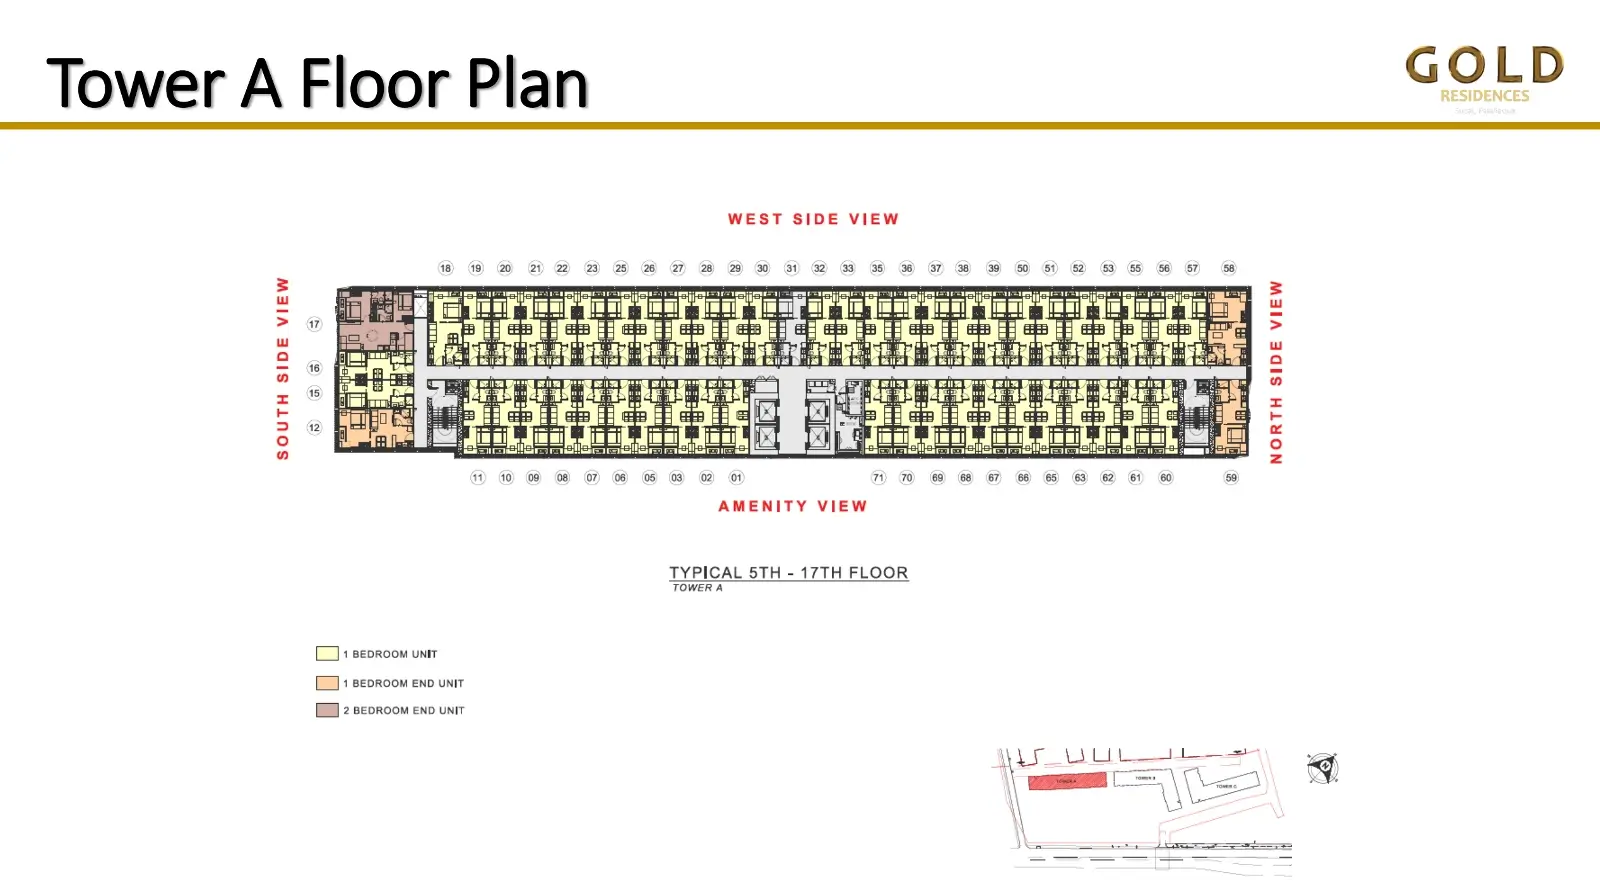 Gold Residences Tower A Floor Plan